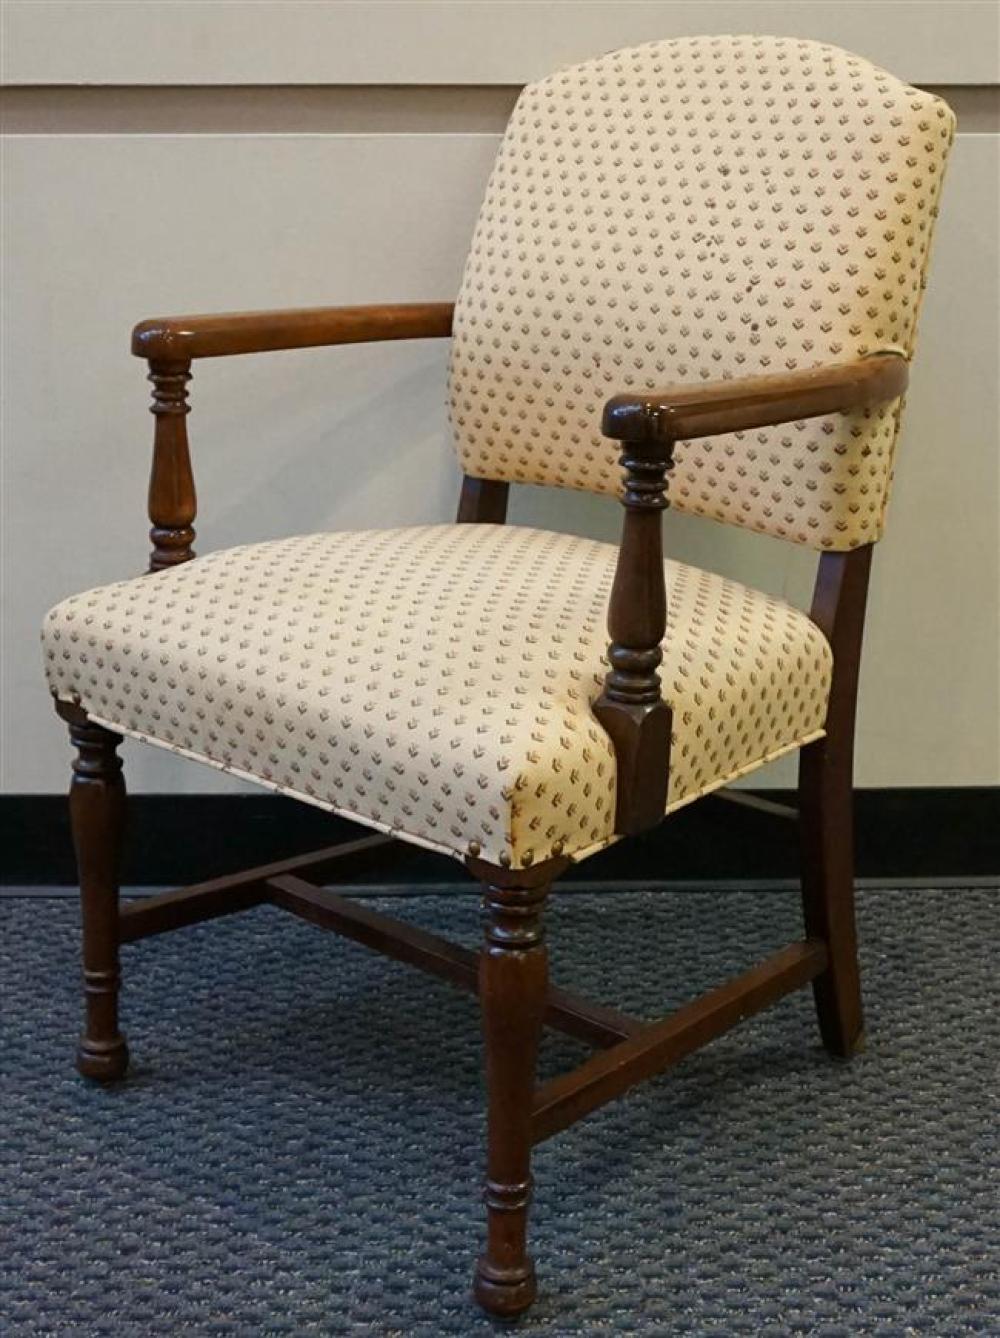 CHERRY UPHOLSTERED SEAT AND BACK ARMCHAIRCherry